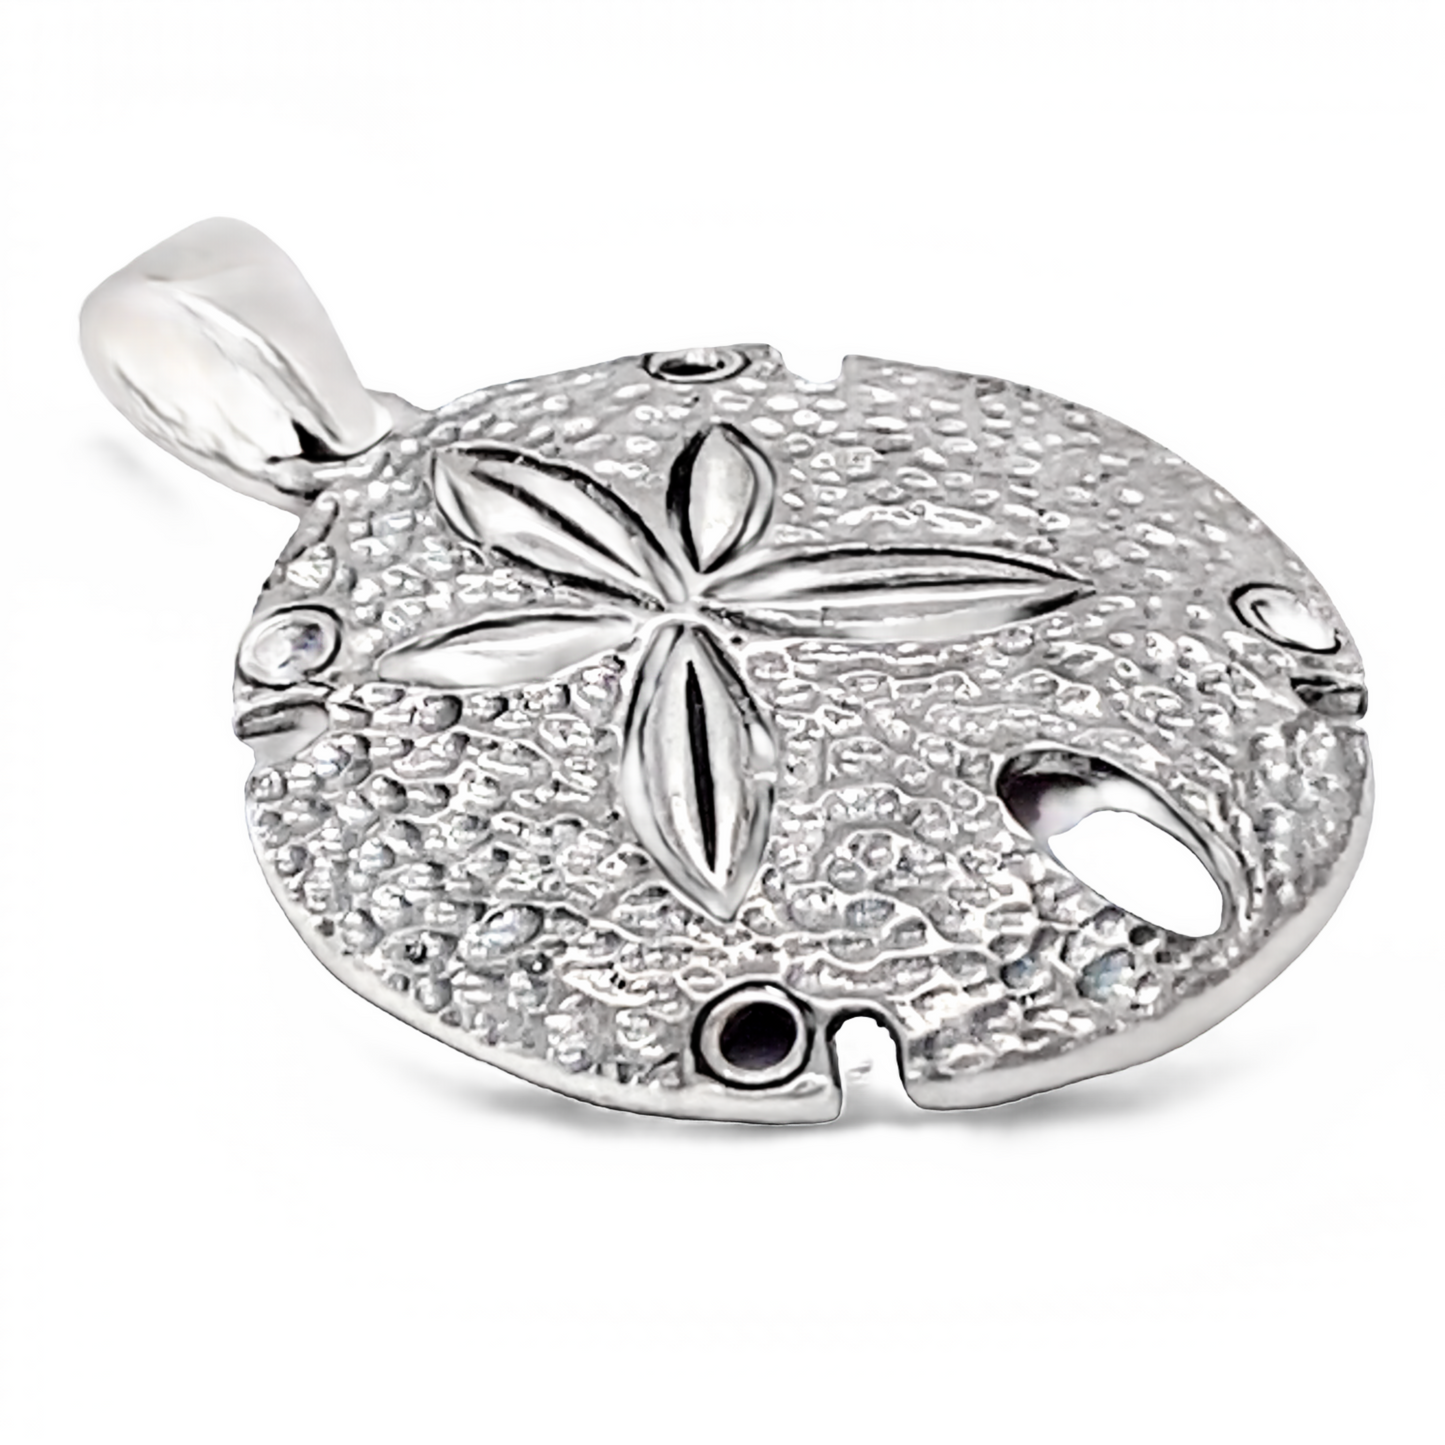 An Super Silver sand dollar pendant with a textured surface on a white background.